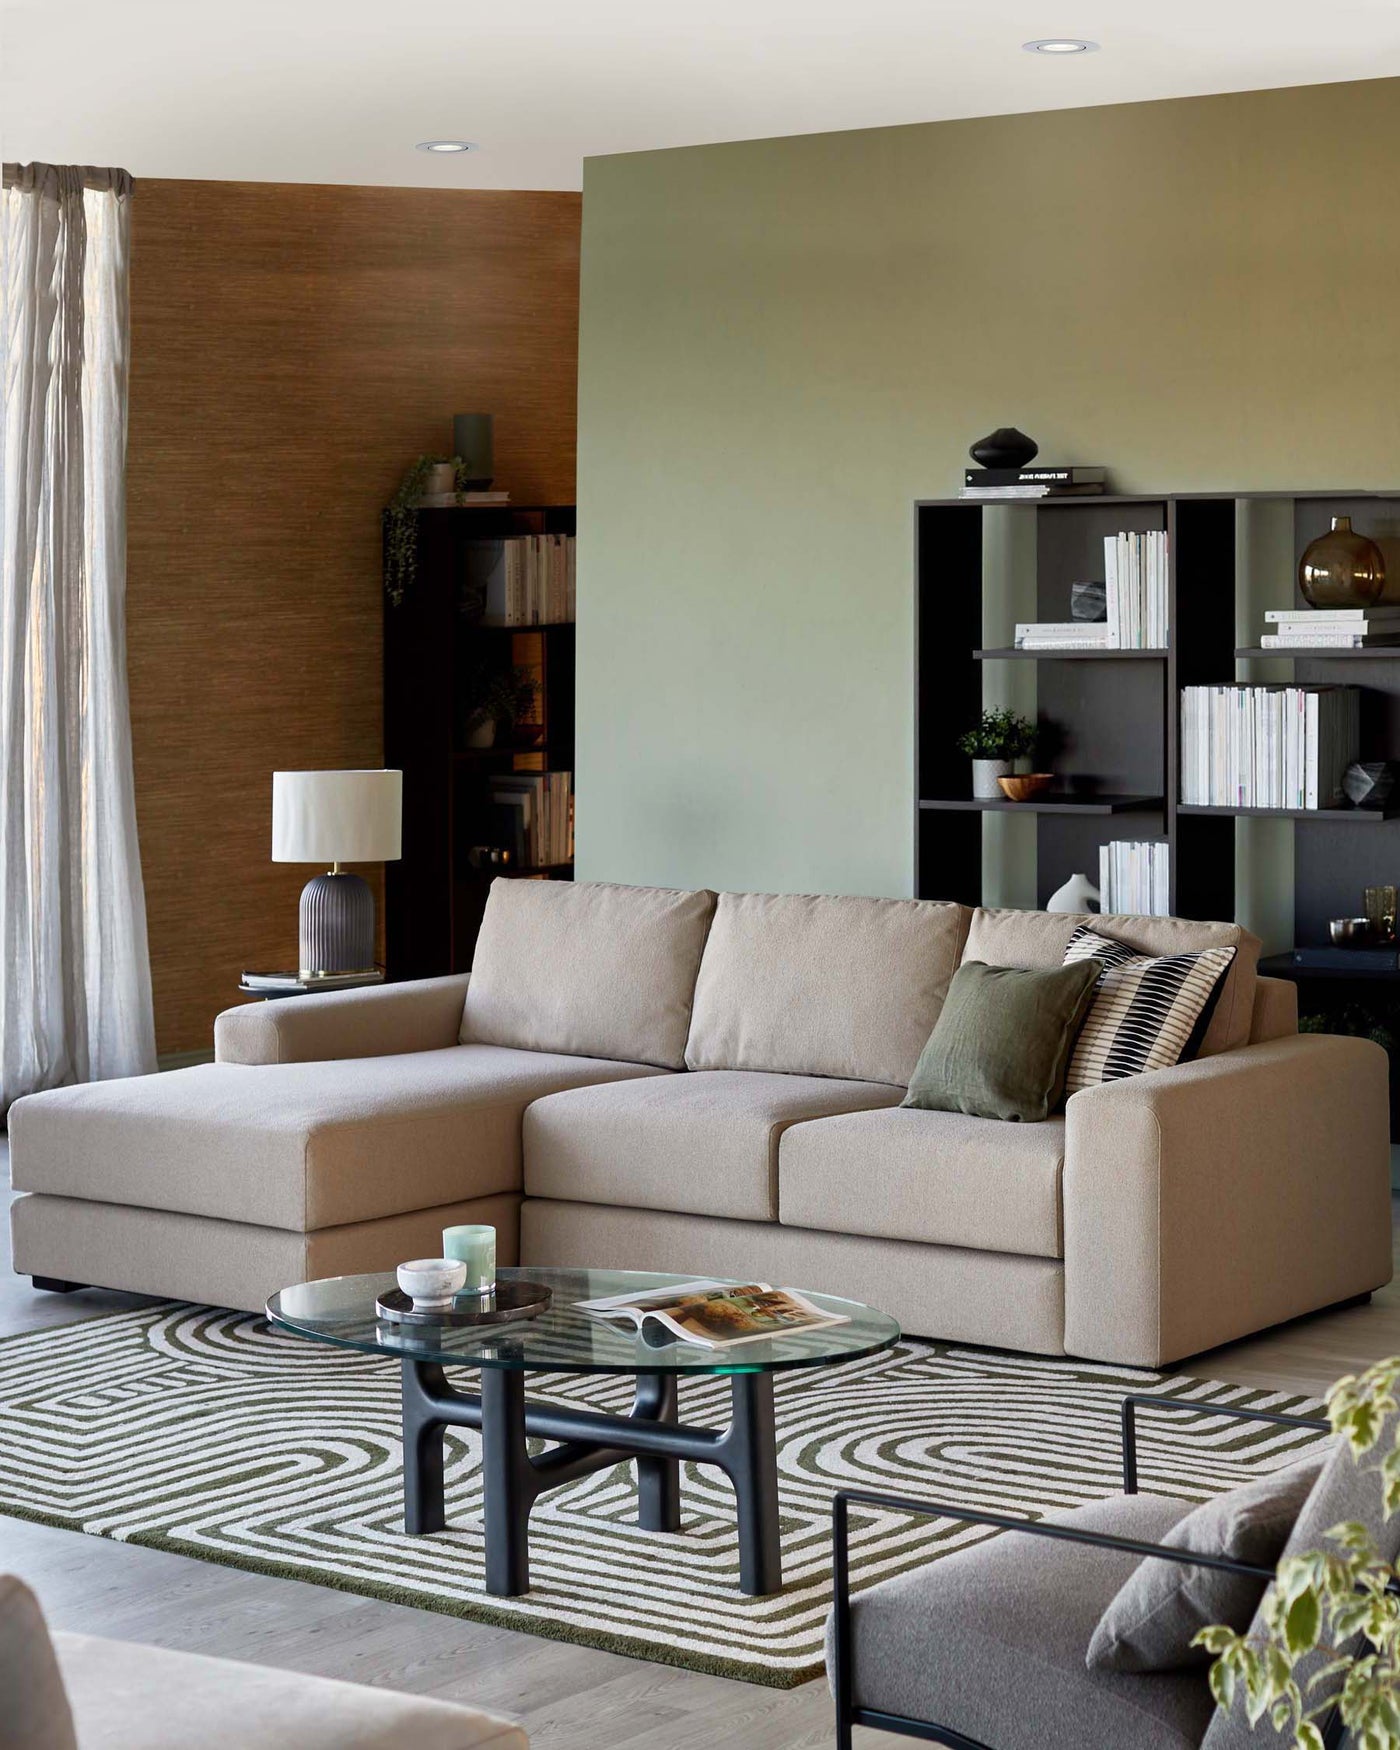 Modern living room showcasing a beige, L-shaped sectional sofa with plush cushions and additional throw pillows in earthy tones. In front of it stands a contemporary round glass-top coffee table with a black frame. To the side, a sleek black bookcase is partially visible, filled with books and decorative items. The furniture is complemented by a patterned area rug with geometric designs, and a matching side table with a lamp is partially seen to the left.